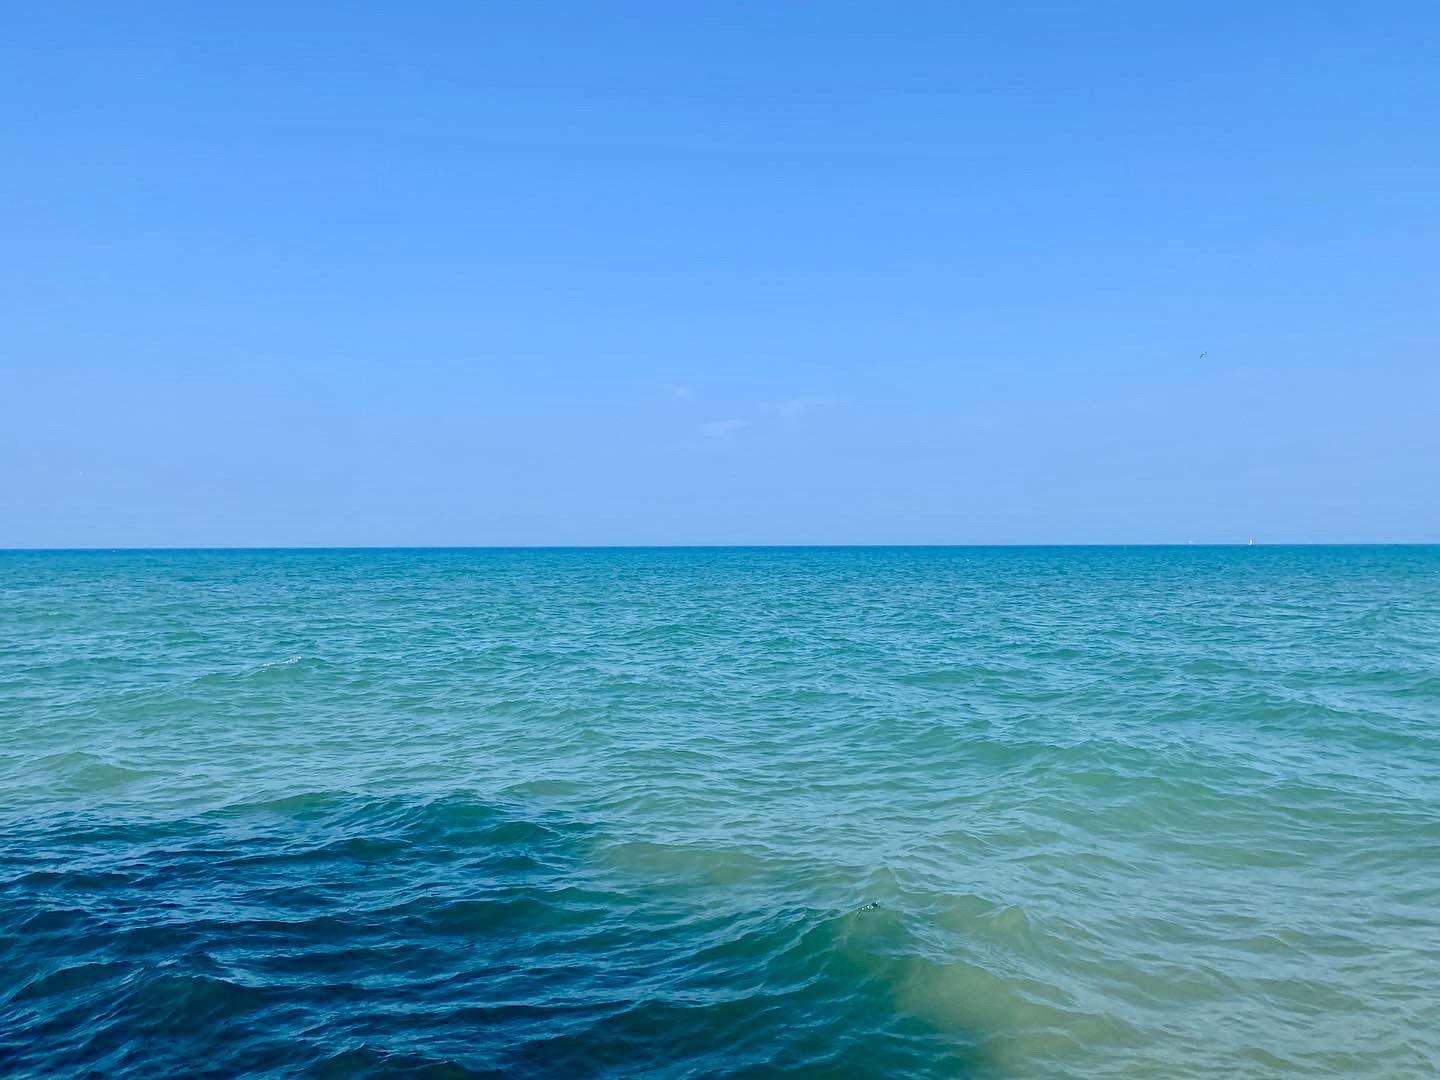 Bright, clear blue sky above a turquoise-colored lake horizon